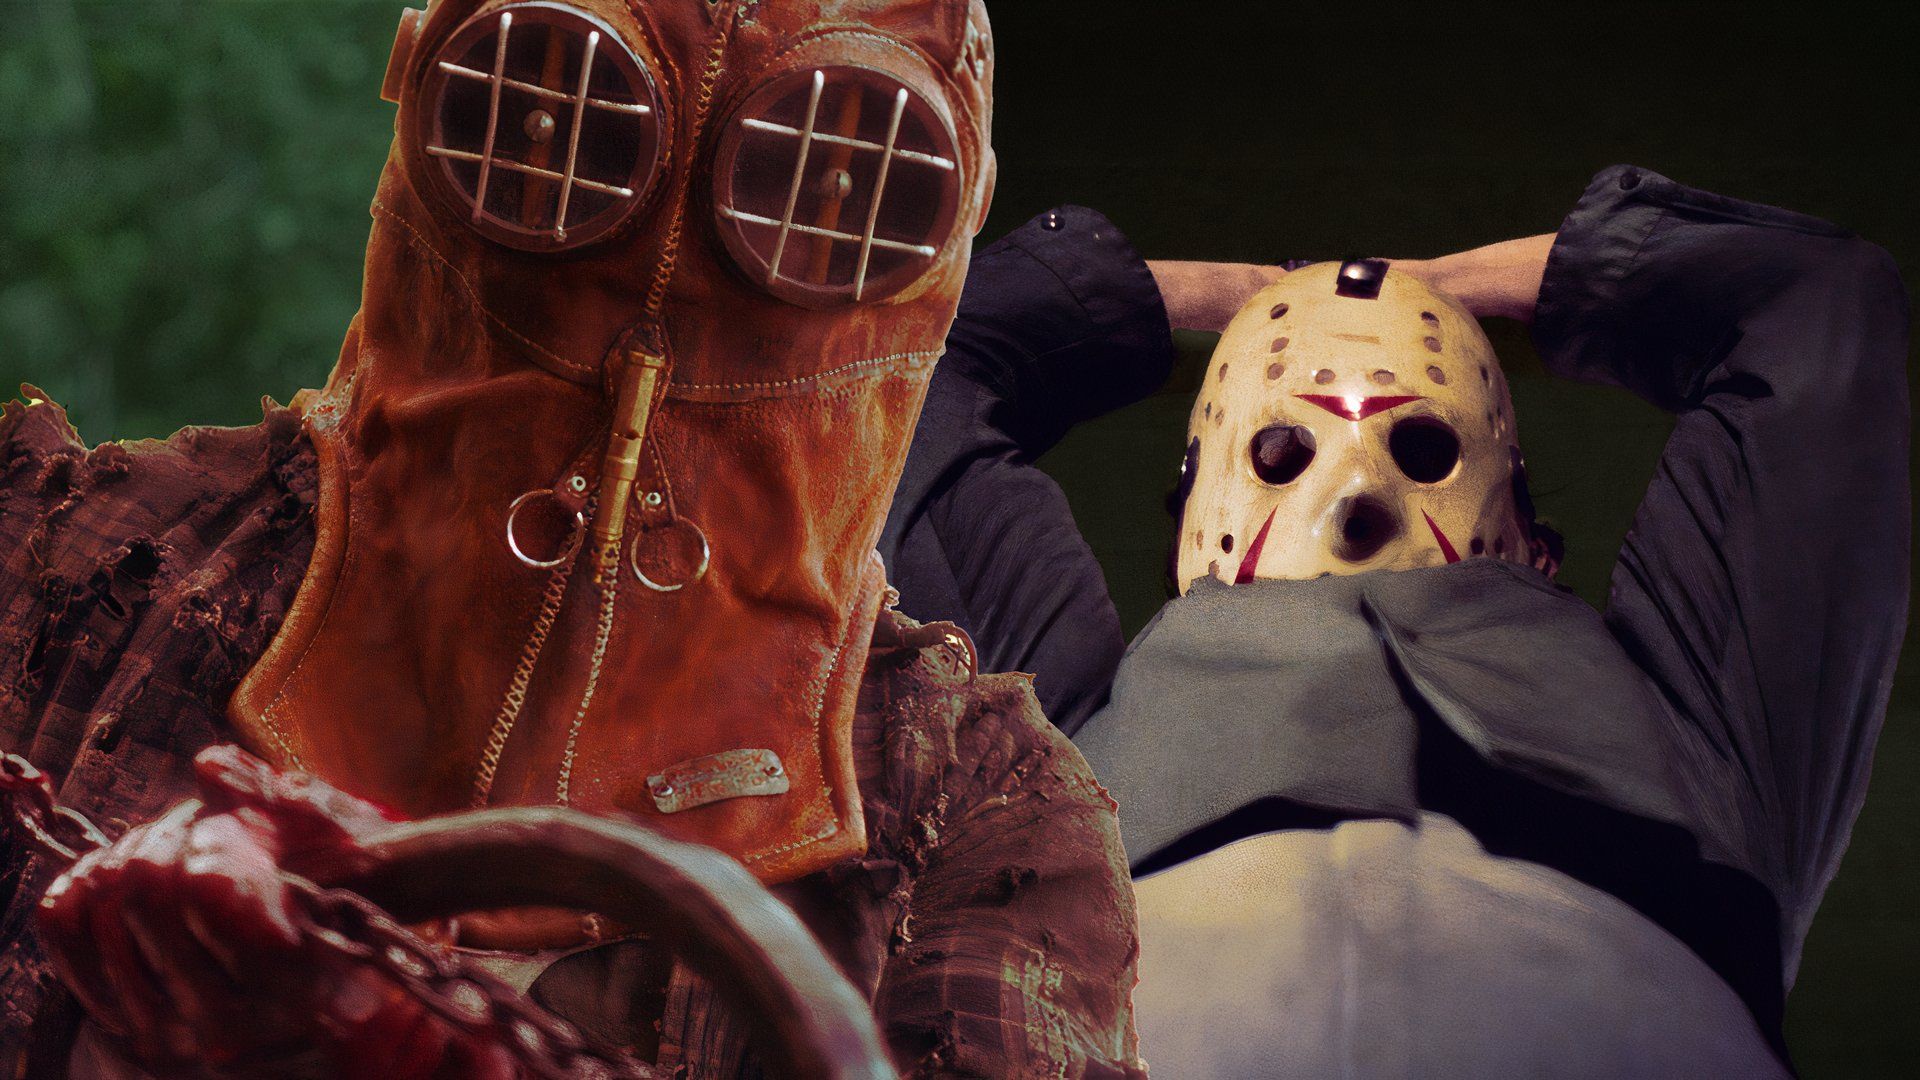 An edited image of Jason Voorhees in his hockey mask attacking someone and the killer from In a Violent Nature